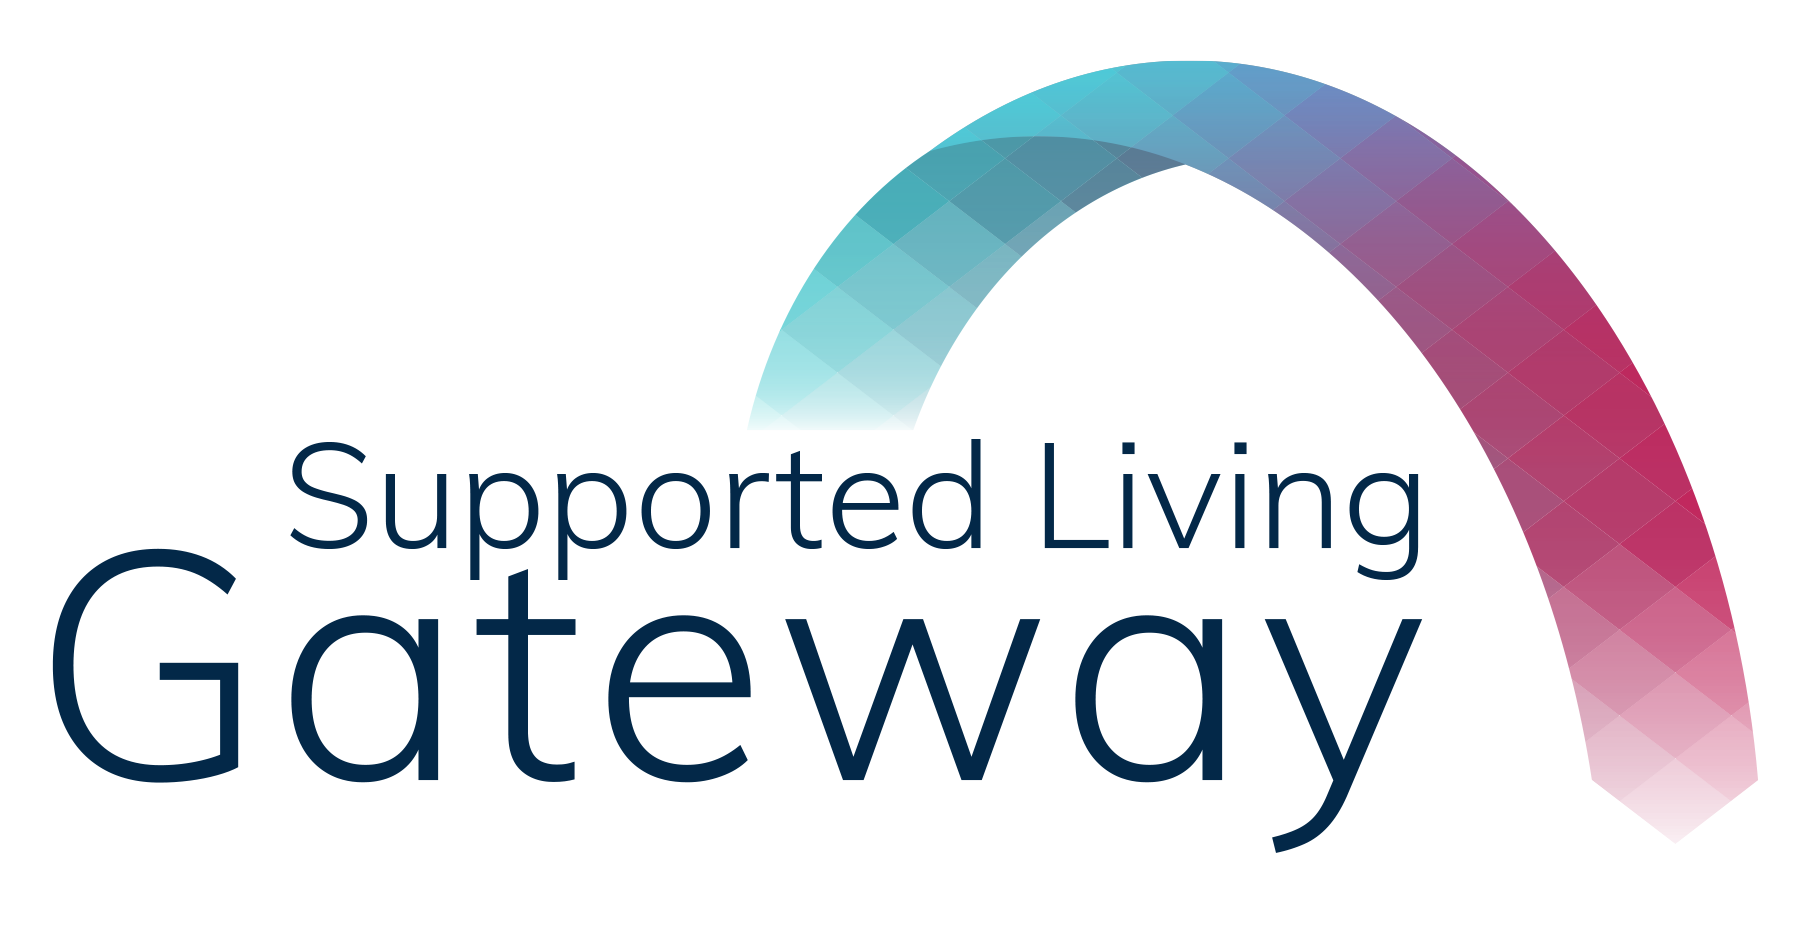 supported living gateway